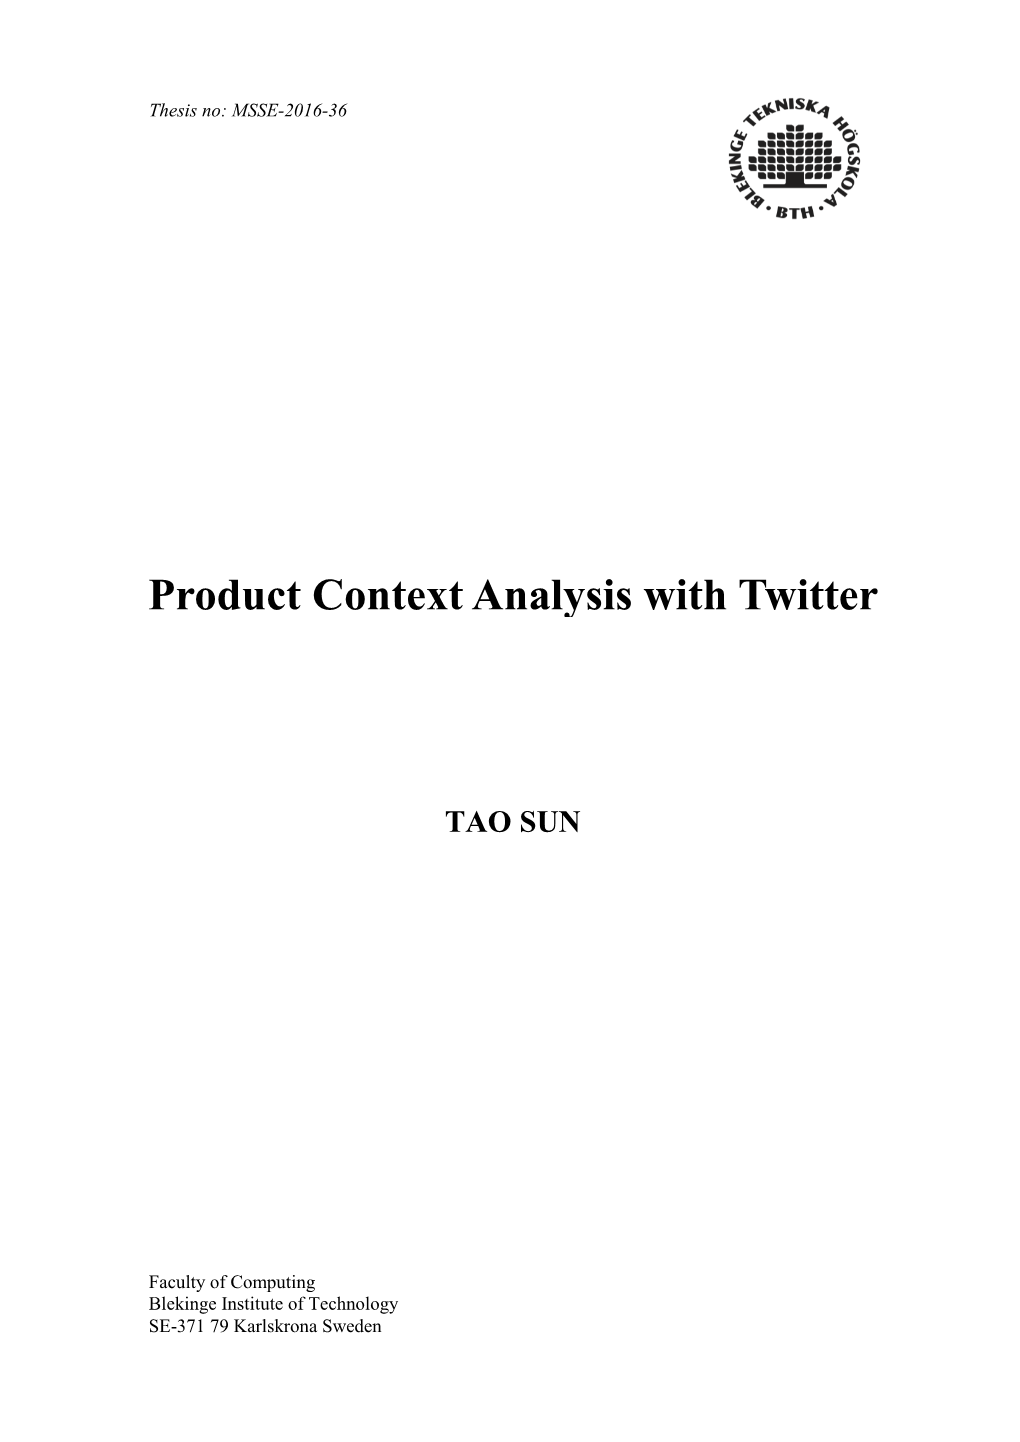 Product Context Analysis with Twitter Data